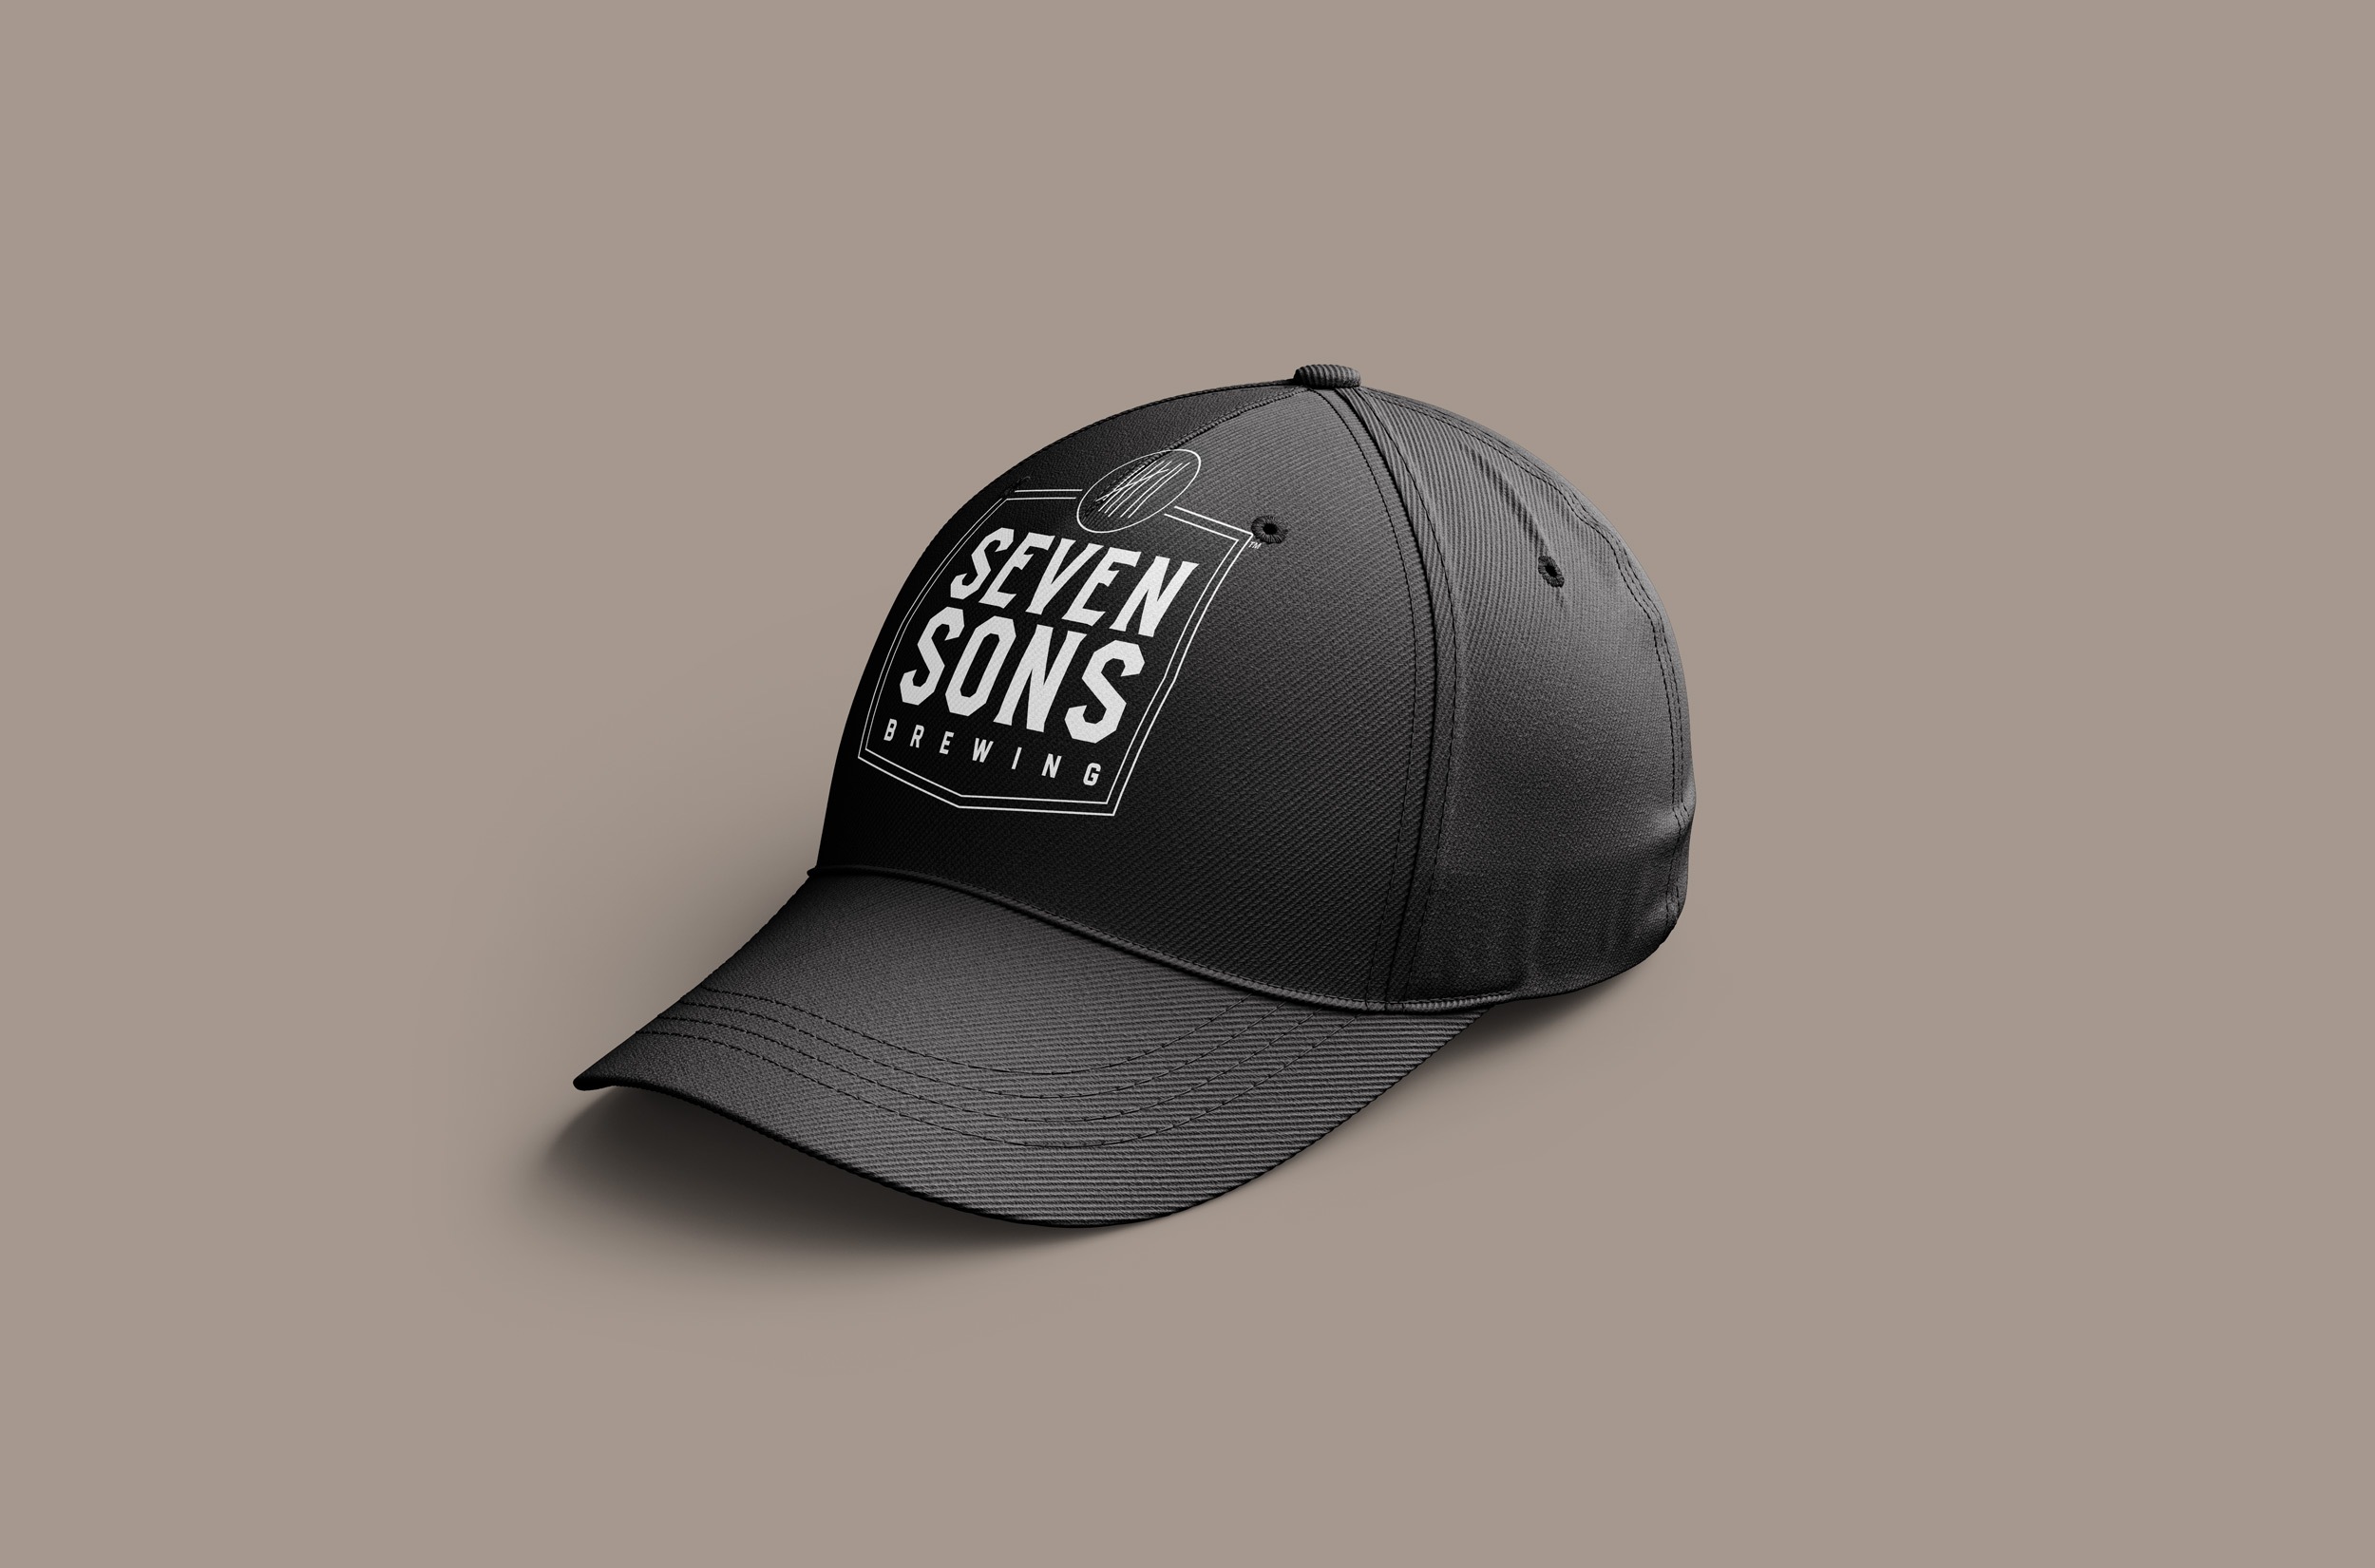 Seven Sons Branding and Packaging